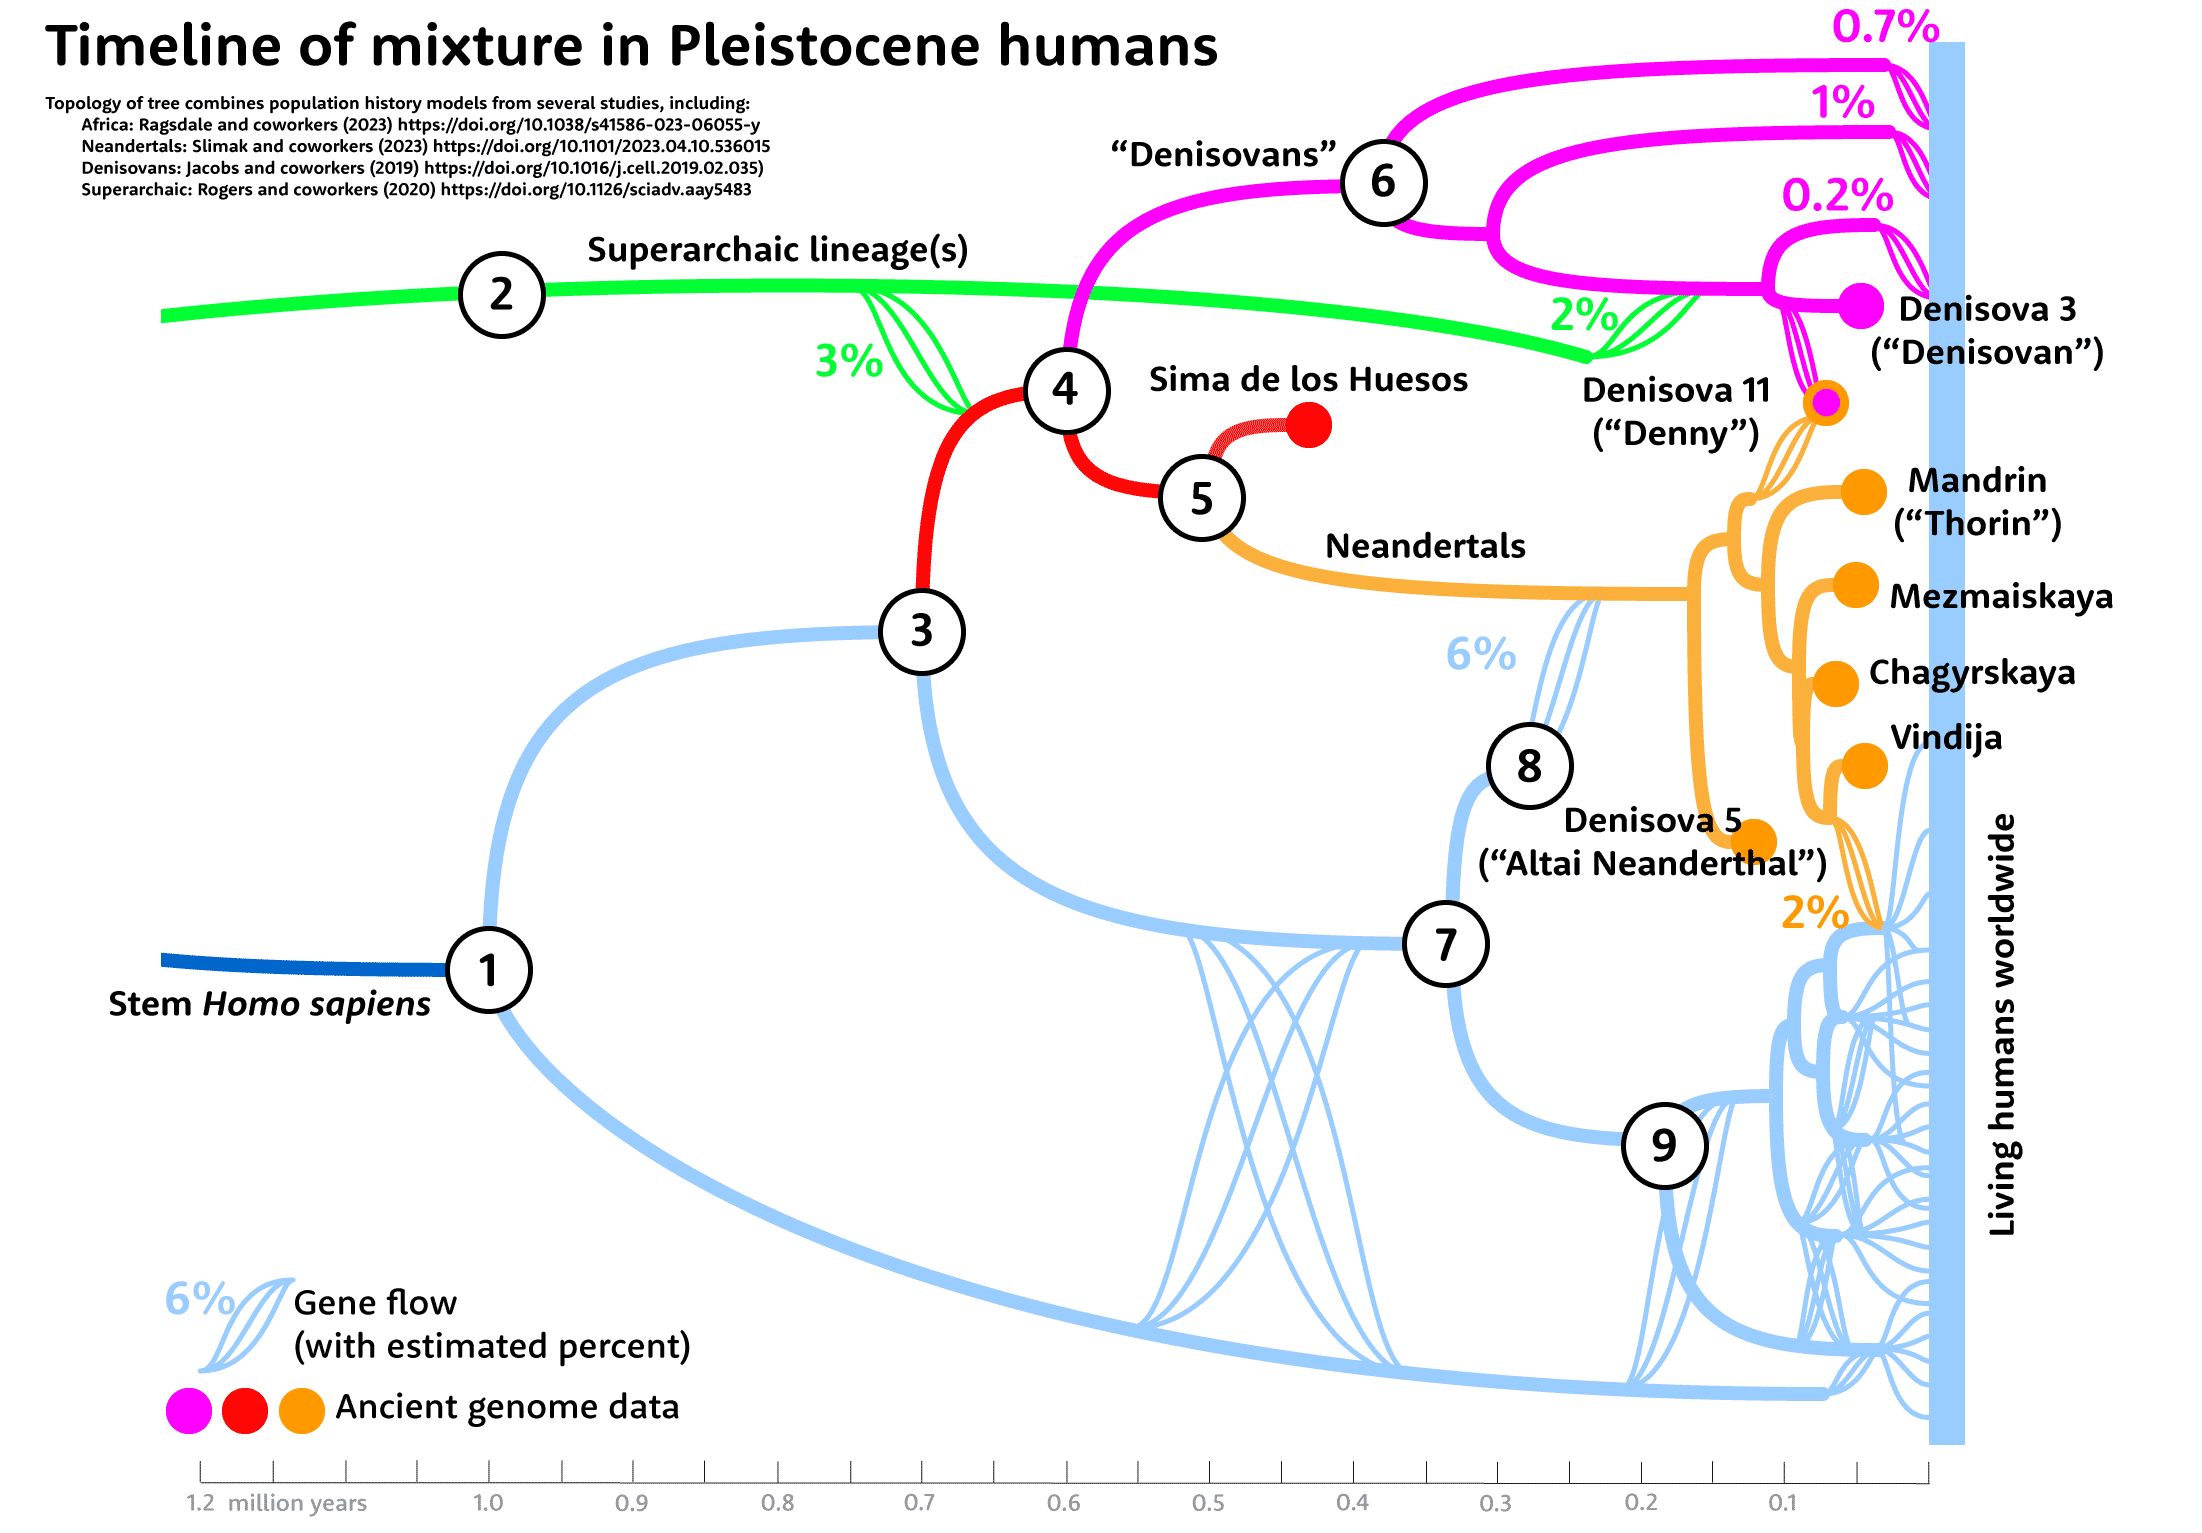 A tree showing mixture between three lineages of Denisovans, five known Neanderthals, the Denisova 11 hybrid individual, and lineages inferred to represent ancestral African groups